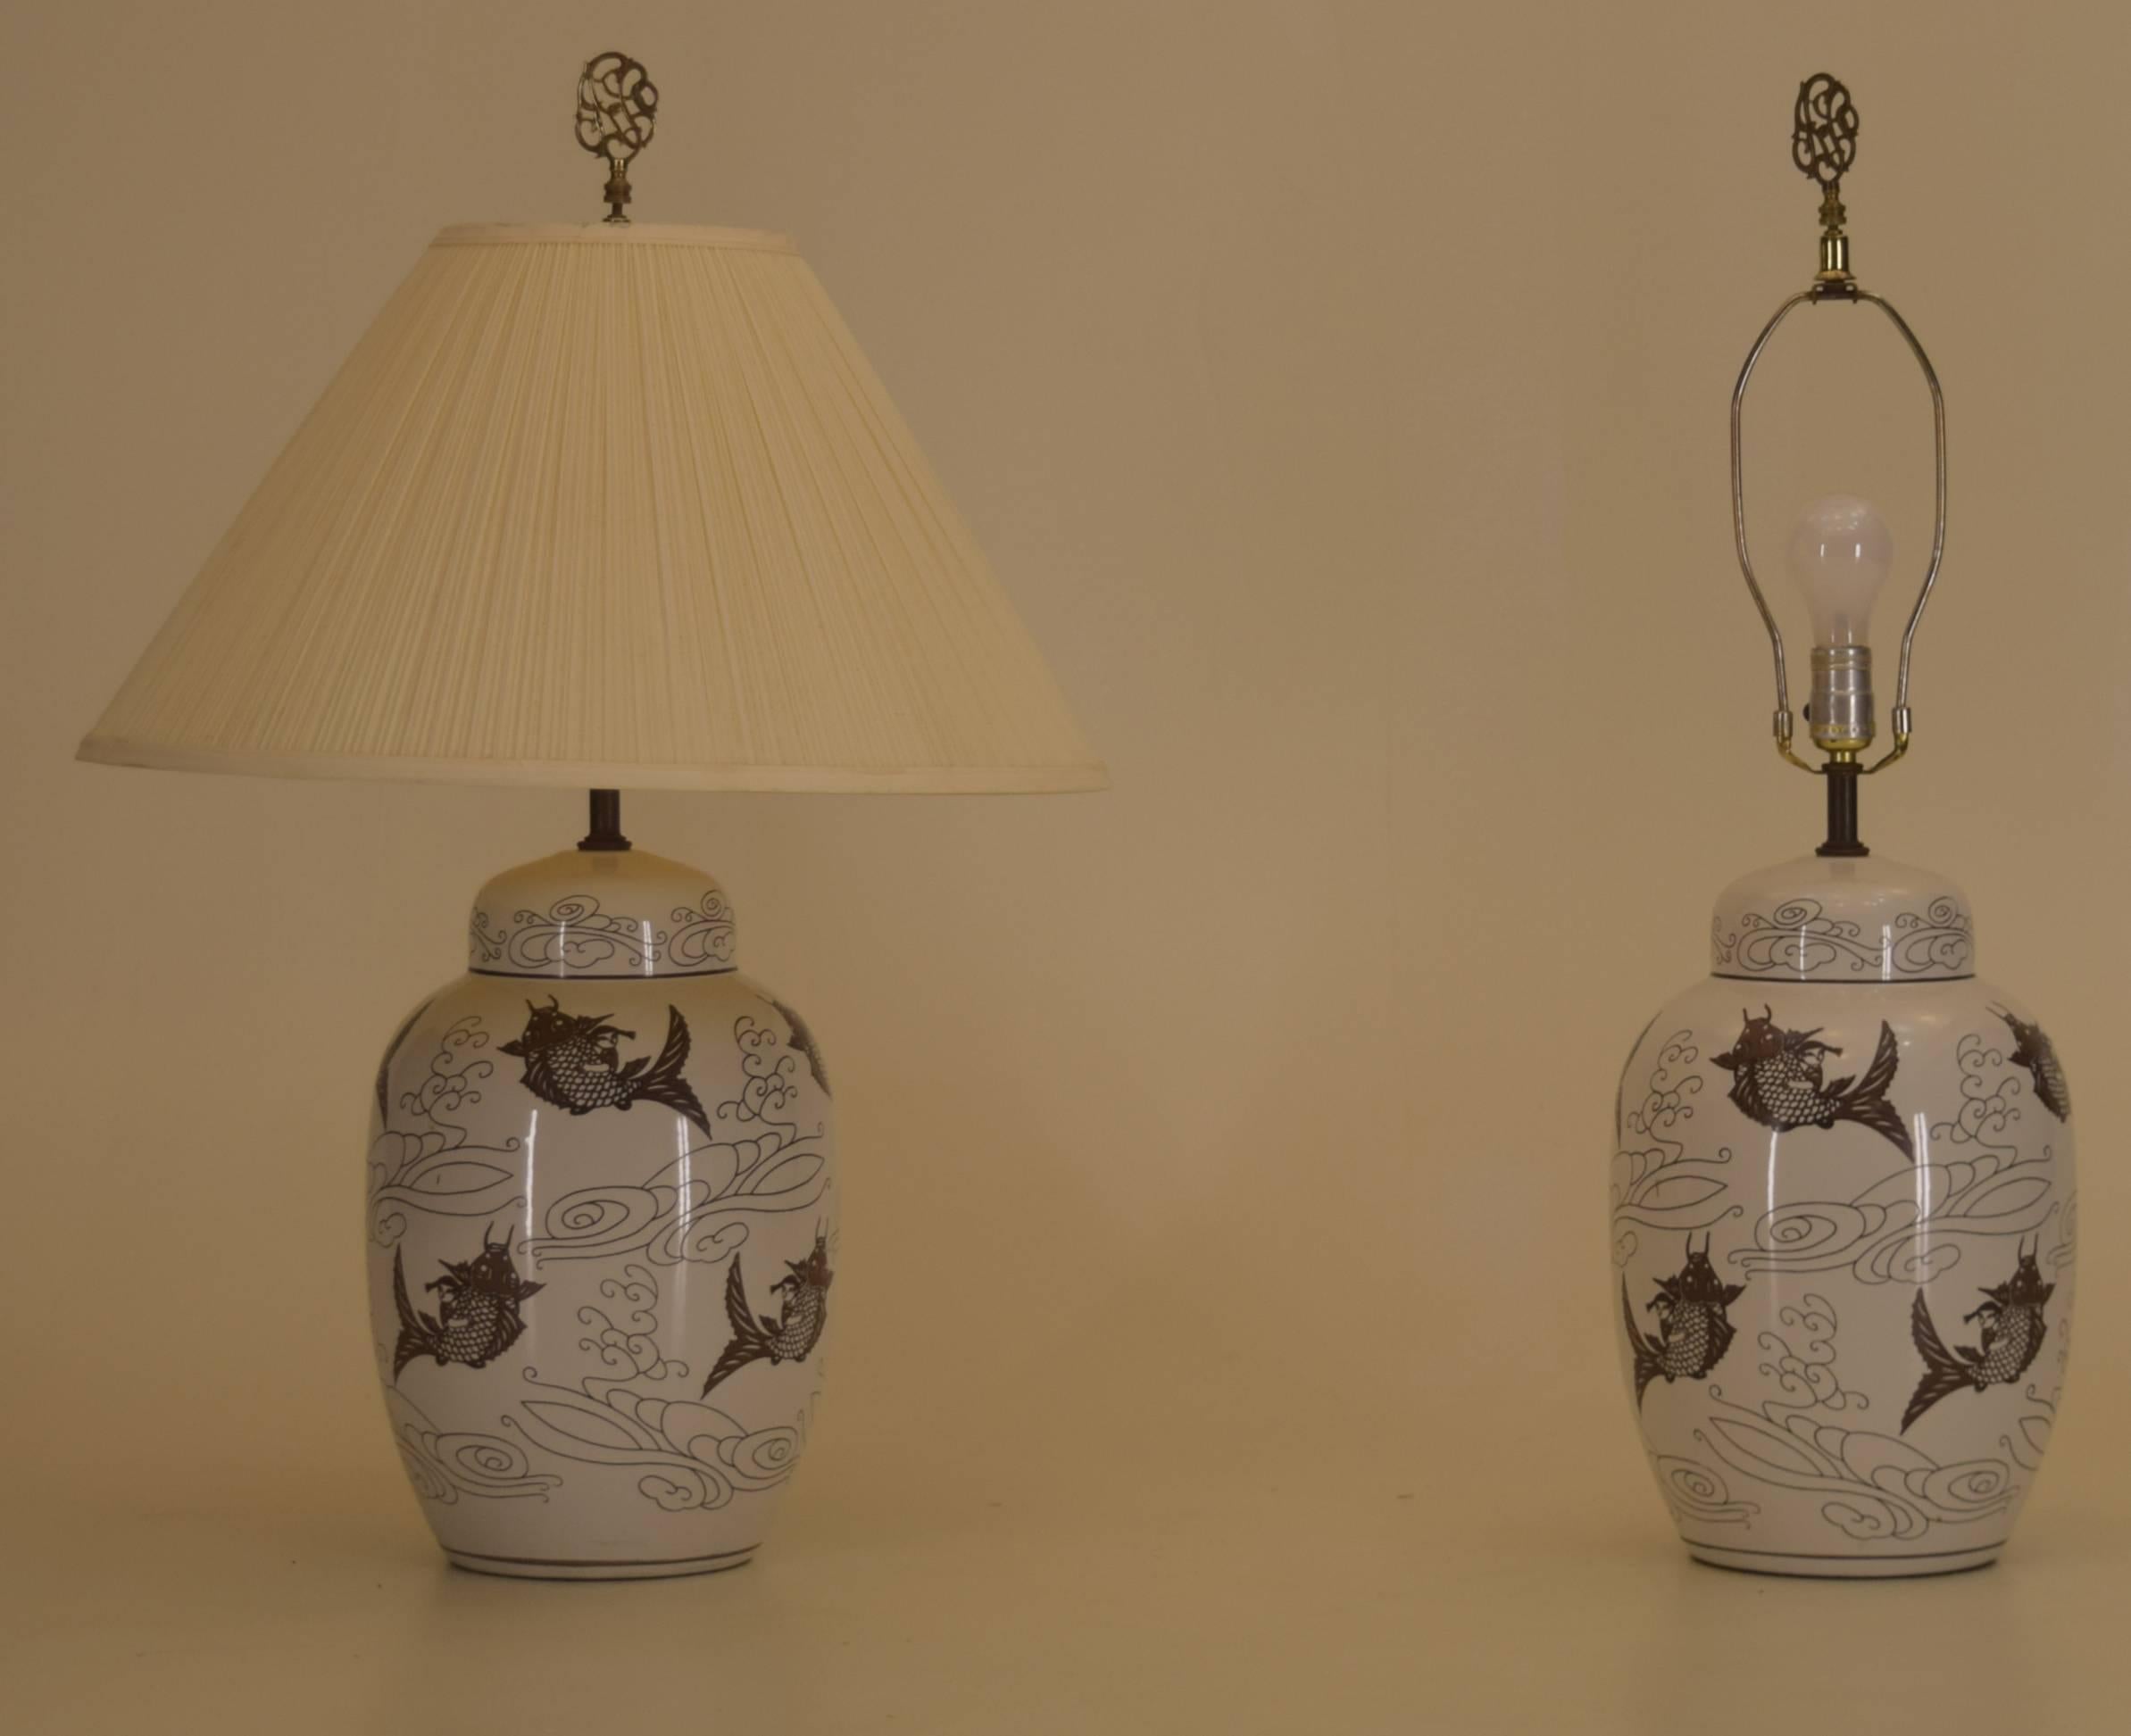 Young girls rinding upon carp or koi are the featured motif of these exceptional table lamps. Coupled with the finials and hi-gloss glaze they are bold and appealing.

The vessels are likely porcelain if not fired pottery.

The application of